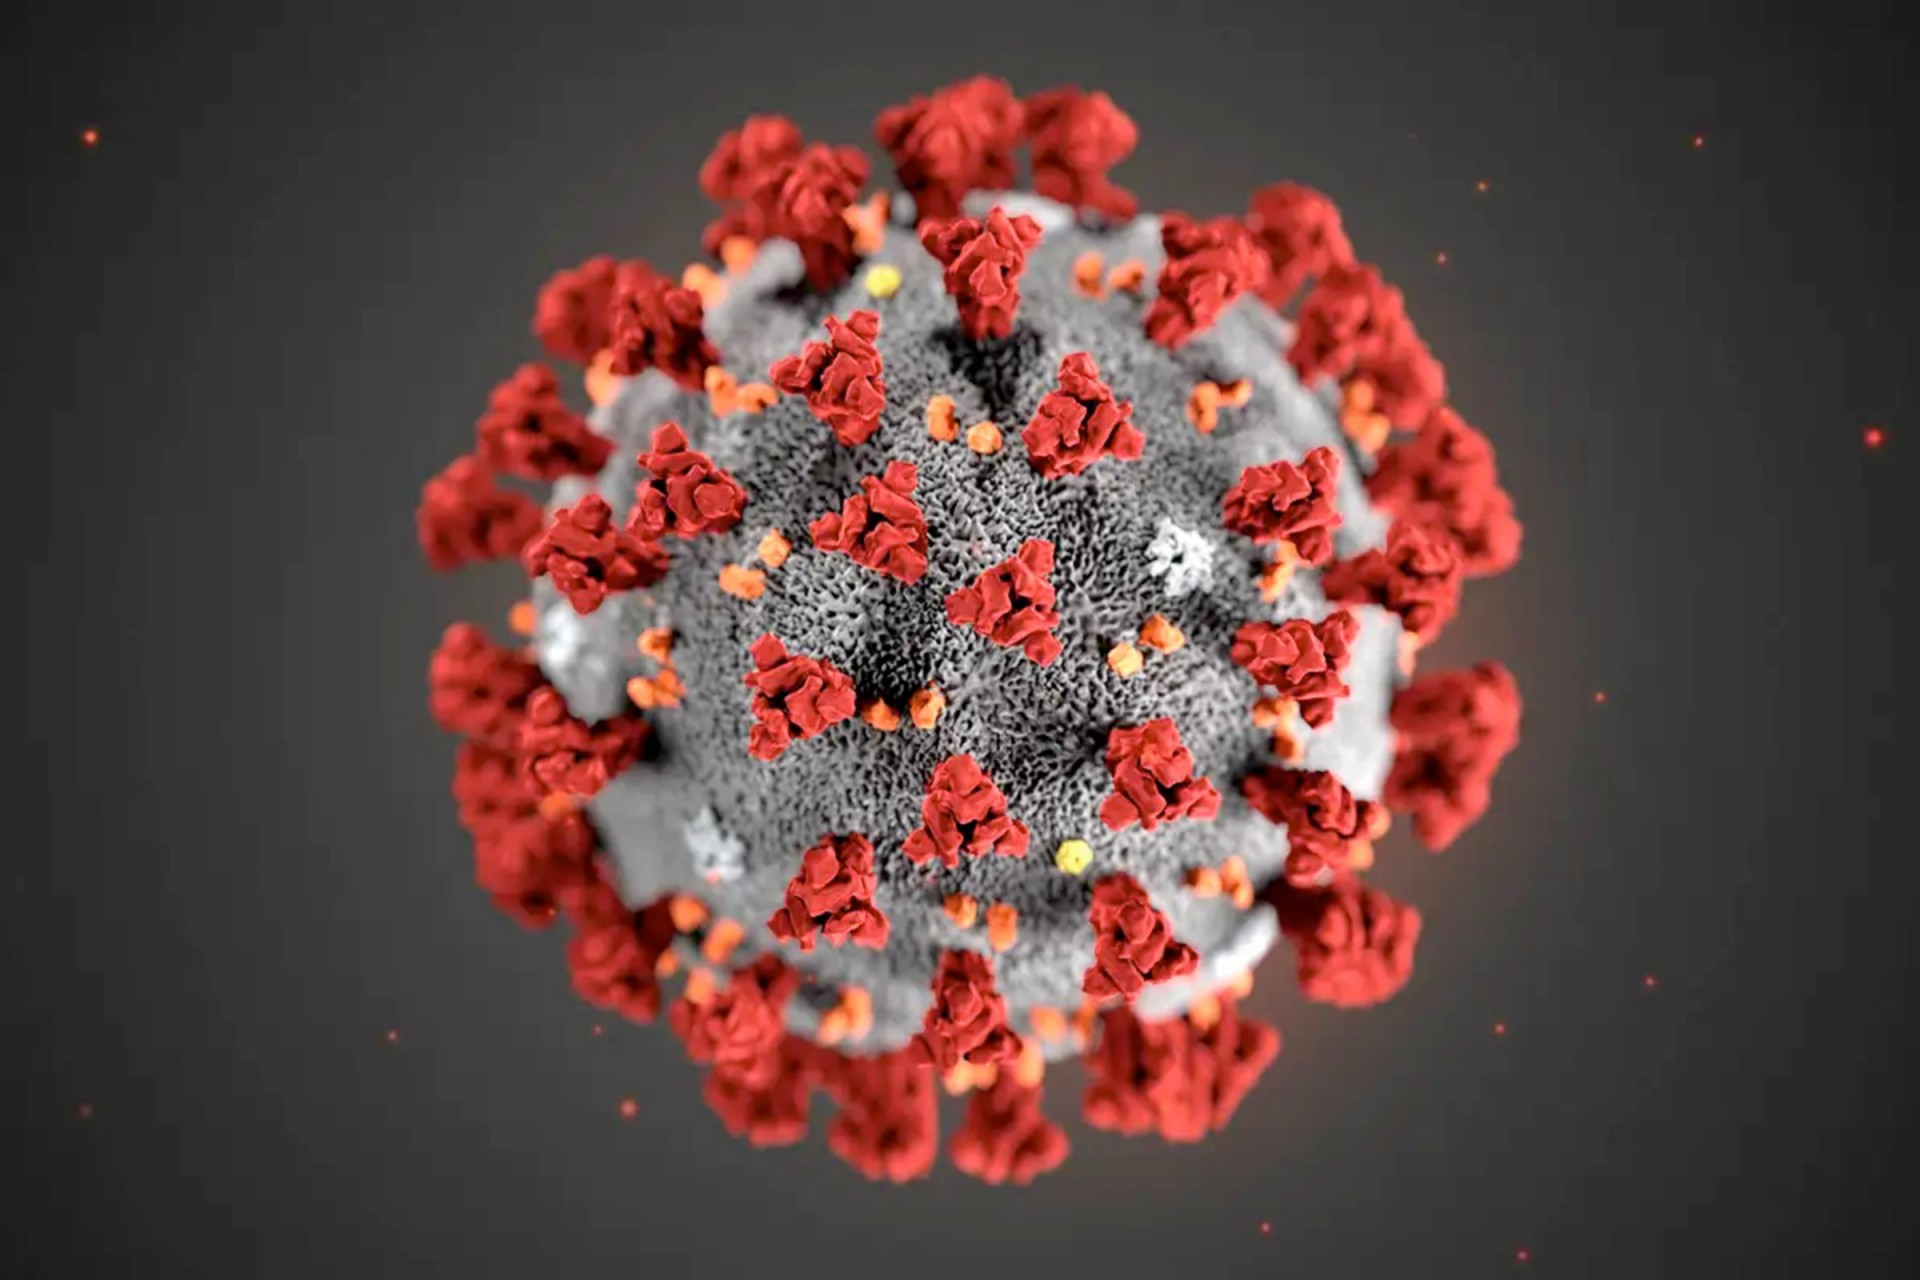 Illustration of the ultrastructure of the Covid-19 virus Illustration of the ultrastructure of the Covid-19 virus, CDC/SCIENCE PHOTO LIBRARY